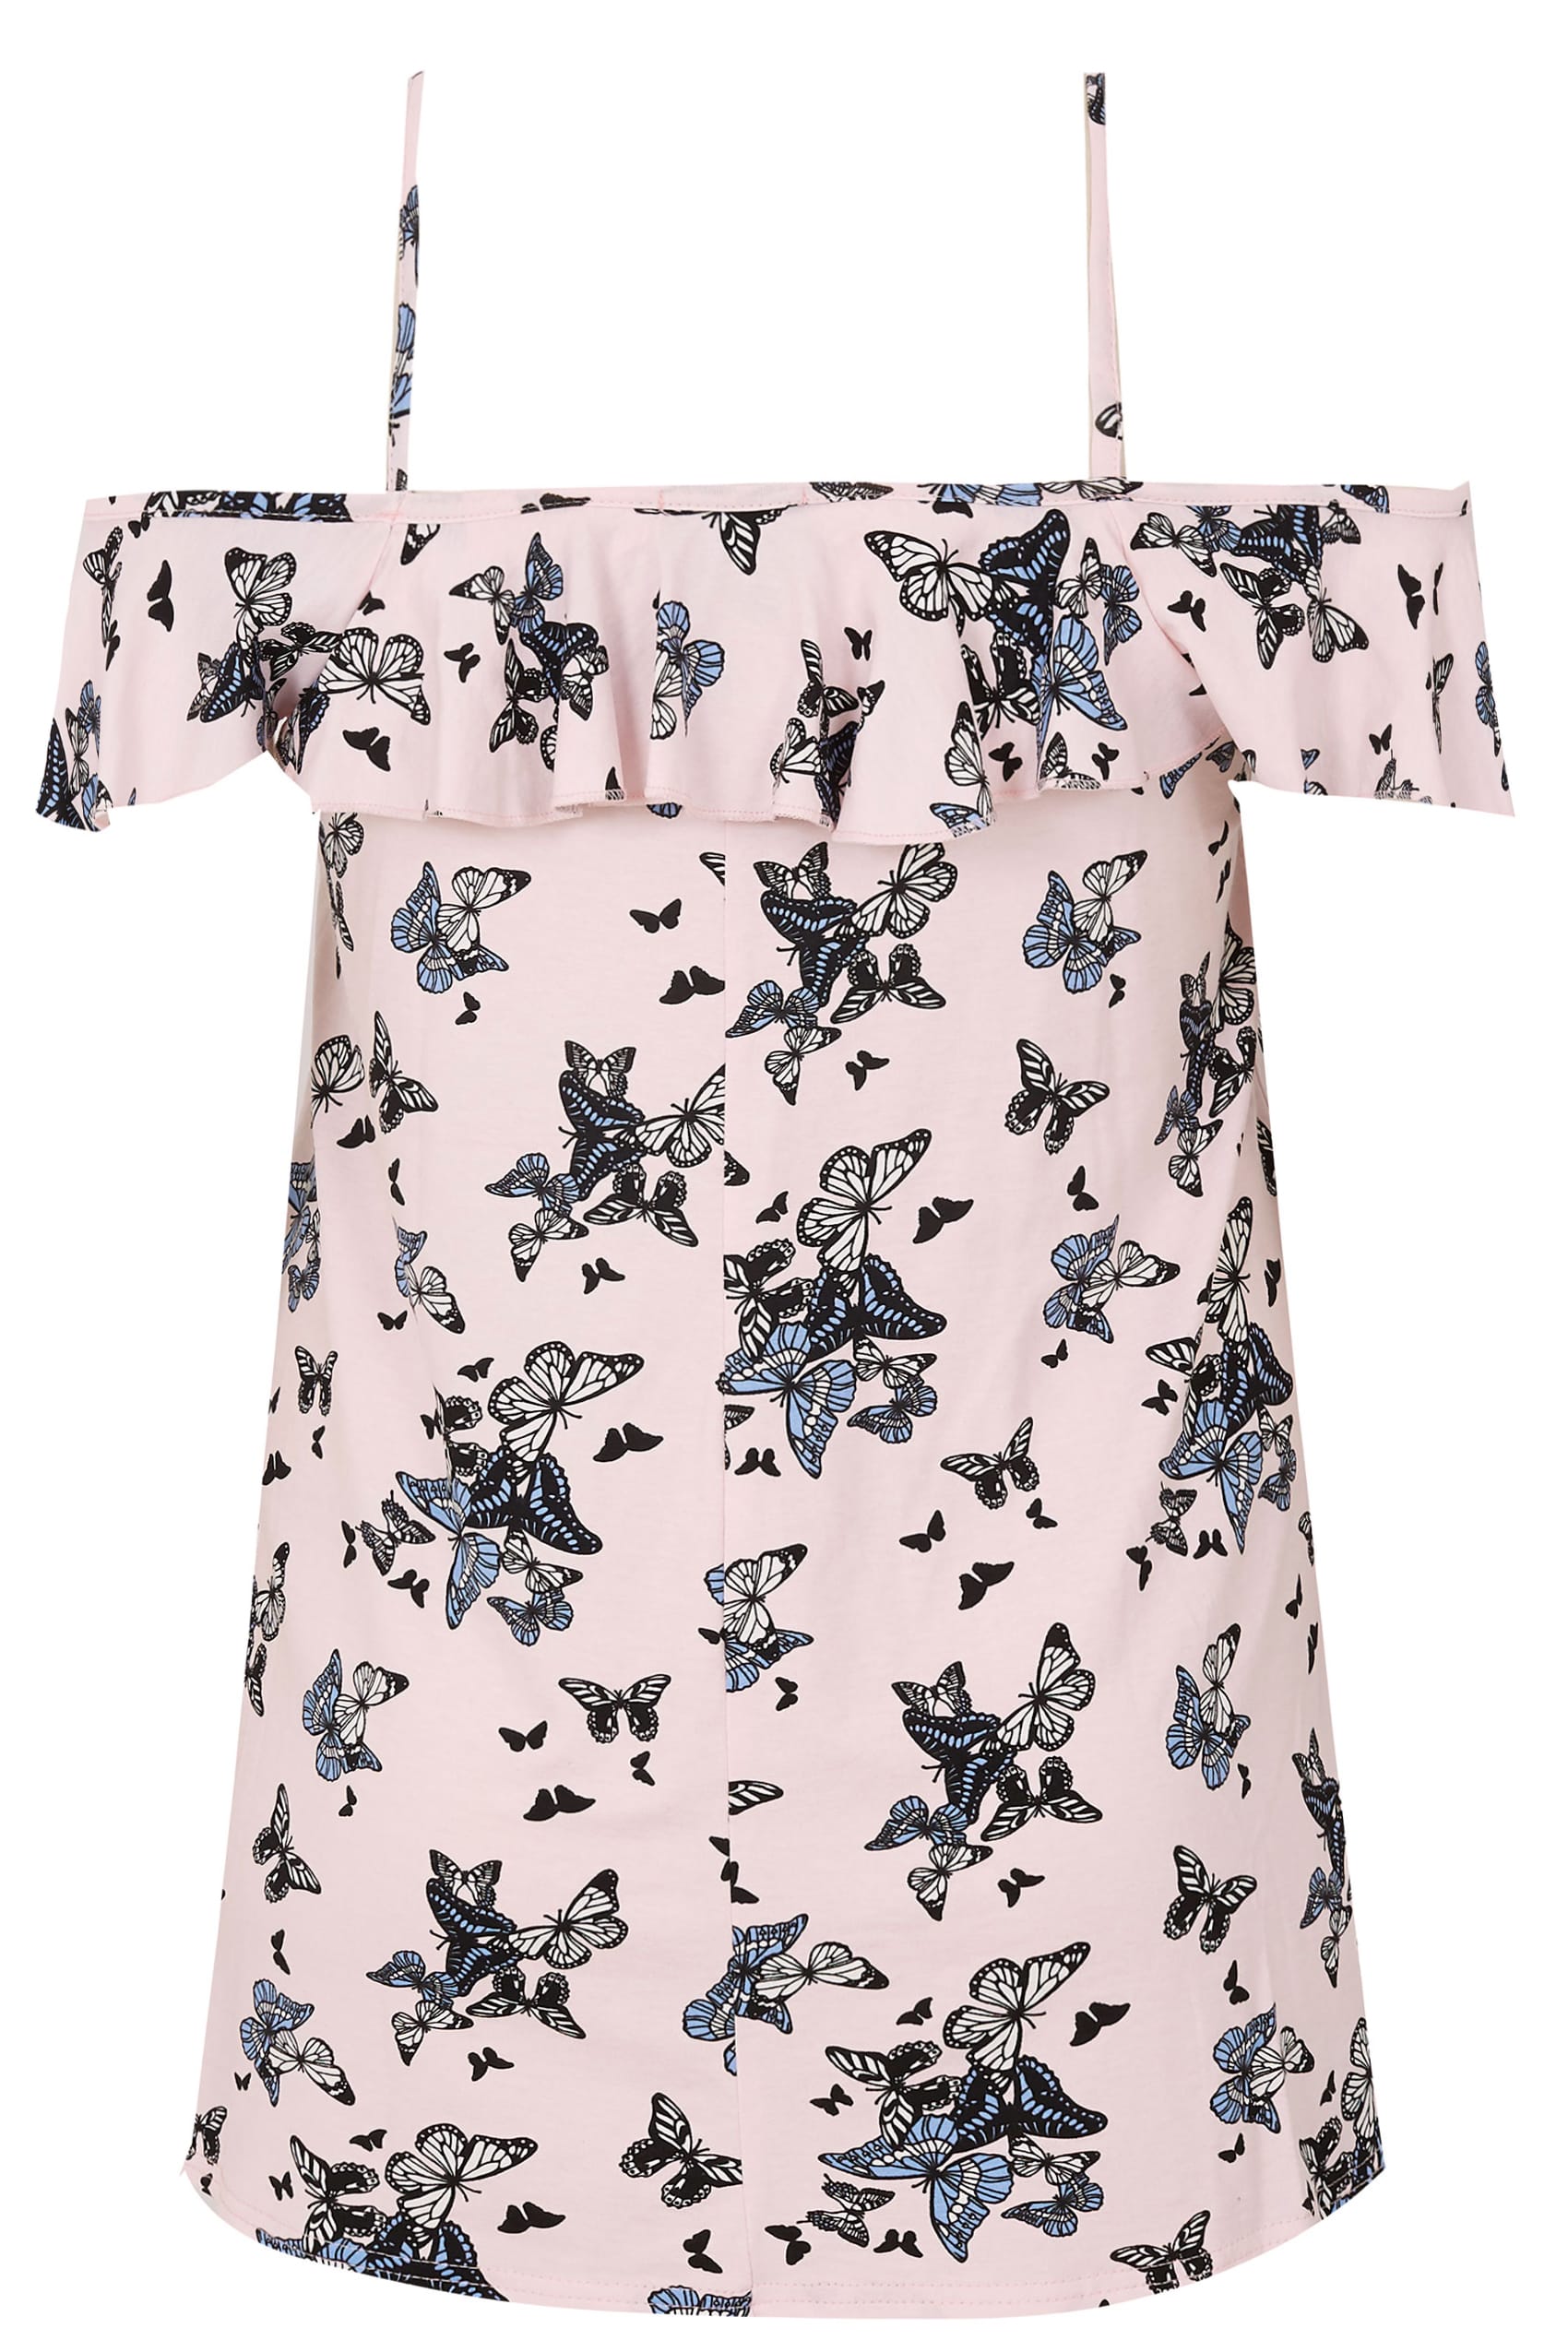 Light Pink Butterfly Print Frill Cold Shoulder Top Plus Size 16 To 36